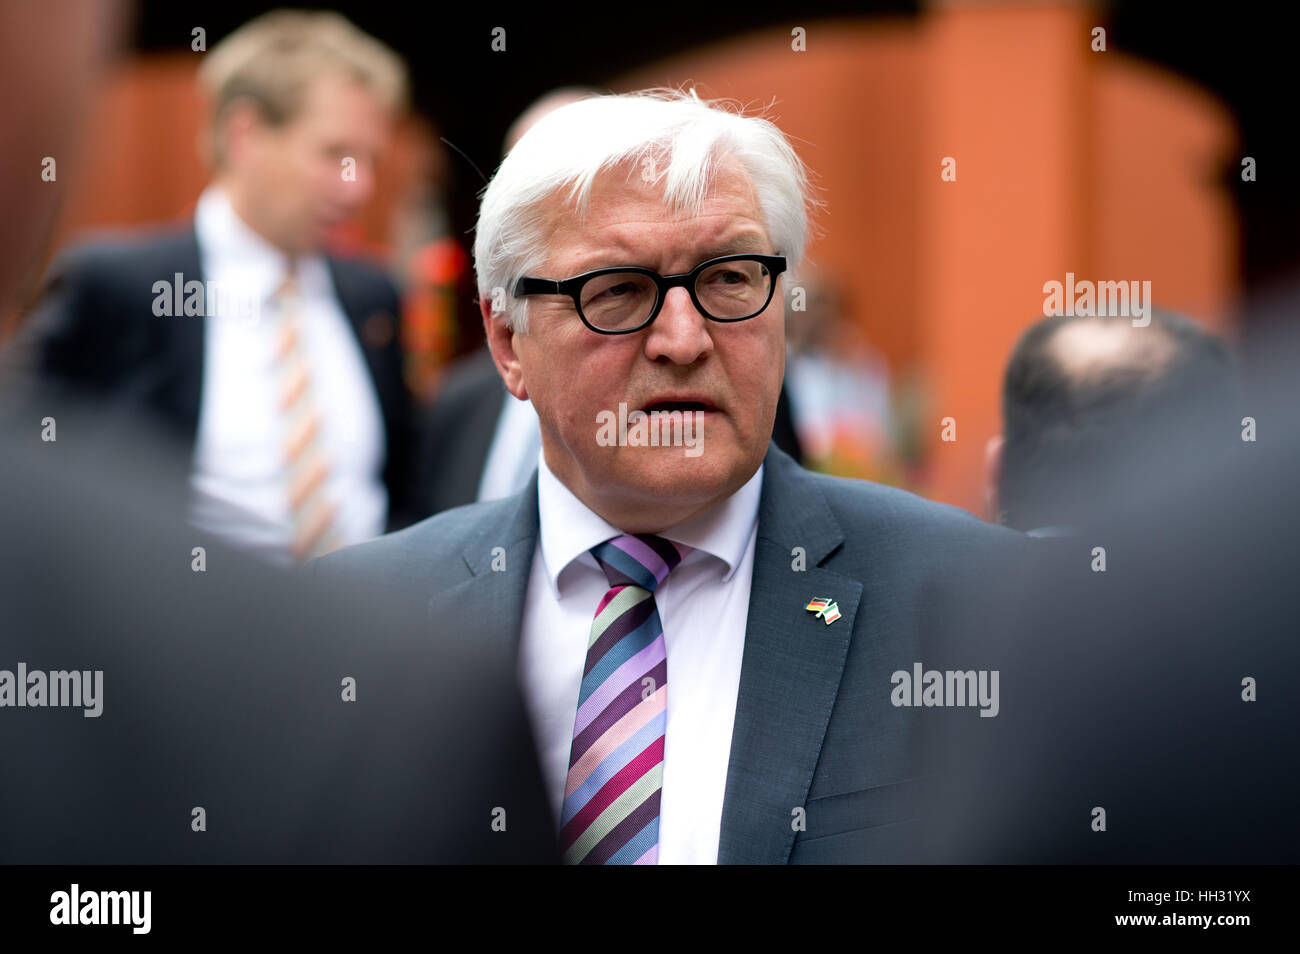 FILE - A file picture dated 17 July 2014 shows German Foreign Minister Frank-Walter Steinmeier (c, SPD) speaking to business representatives on the occasion of the signing of a new Kaufvertrag (lit. purchase contract) for the new BMW factory location in Mexico City, Mexico. Car manufacturer BMW plans to invest around 1 billion dollars in a new factory in San Luis Potosi. Photo: Bernd Von Jutrczenka/dpa Stock Photo